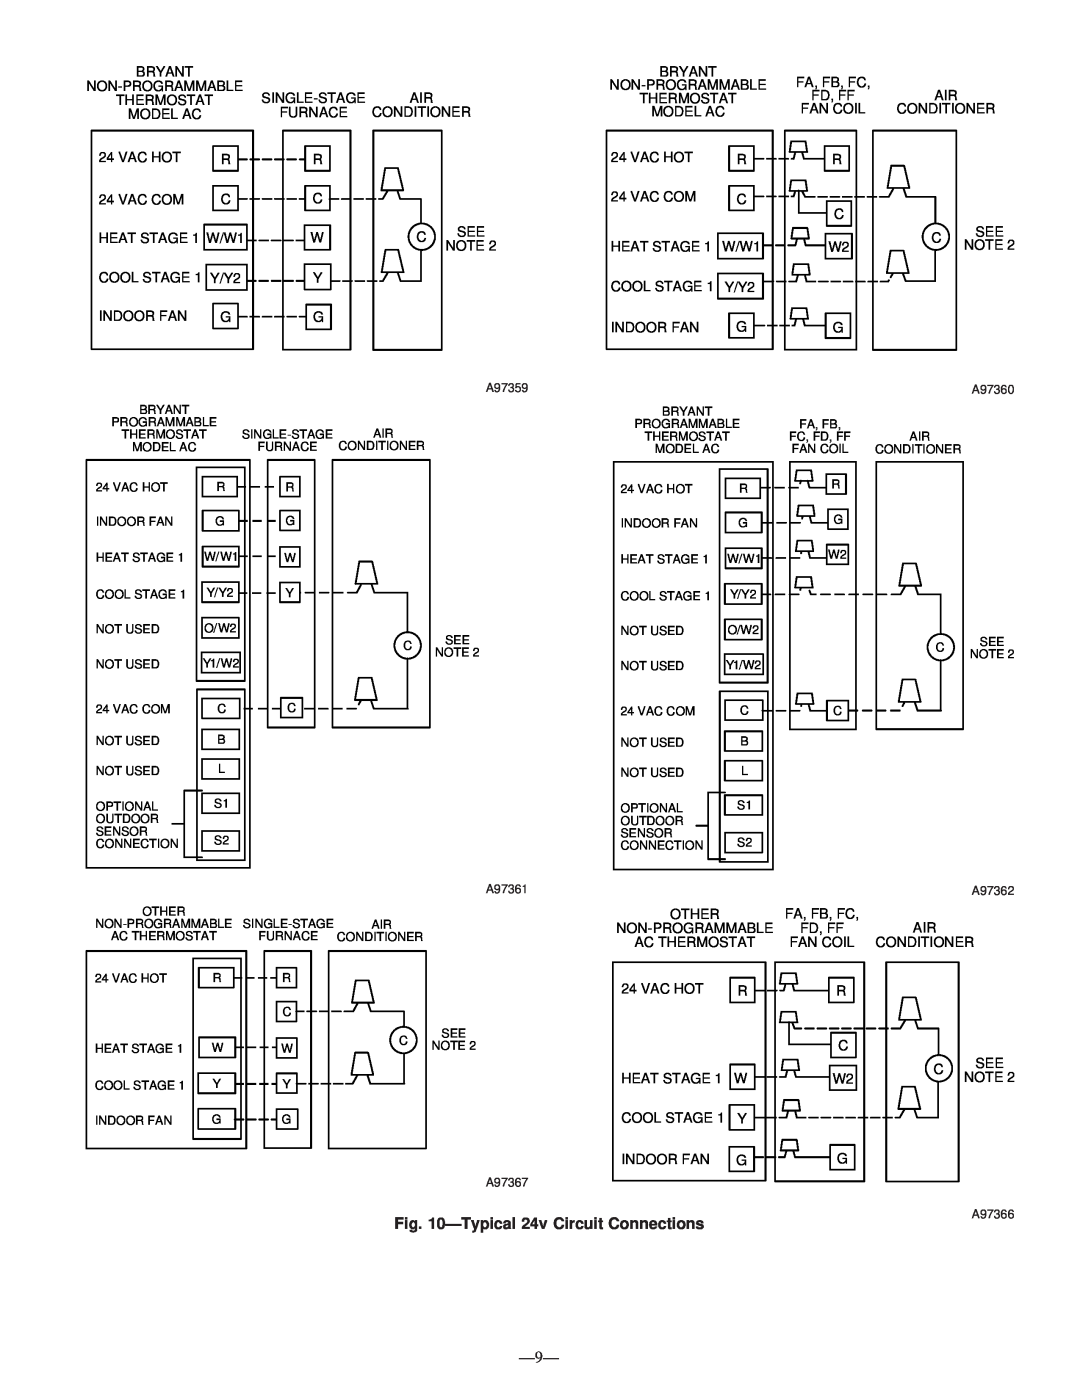 Bryant 591B instruction manual Typical24v Circuit Connections 